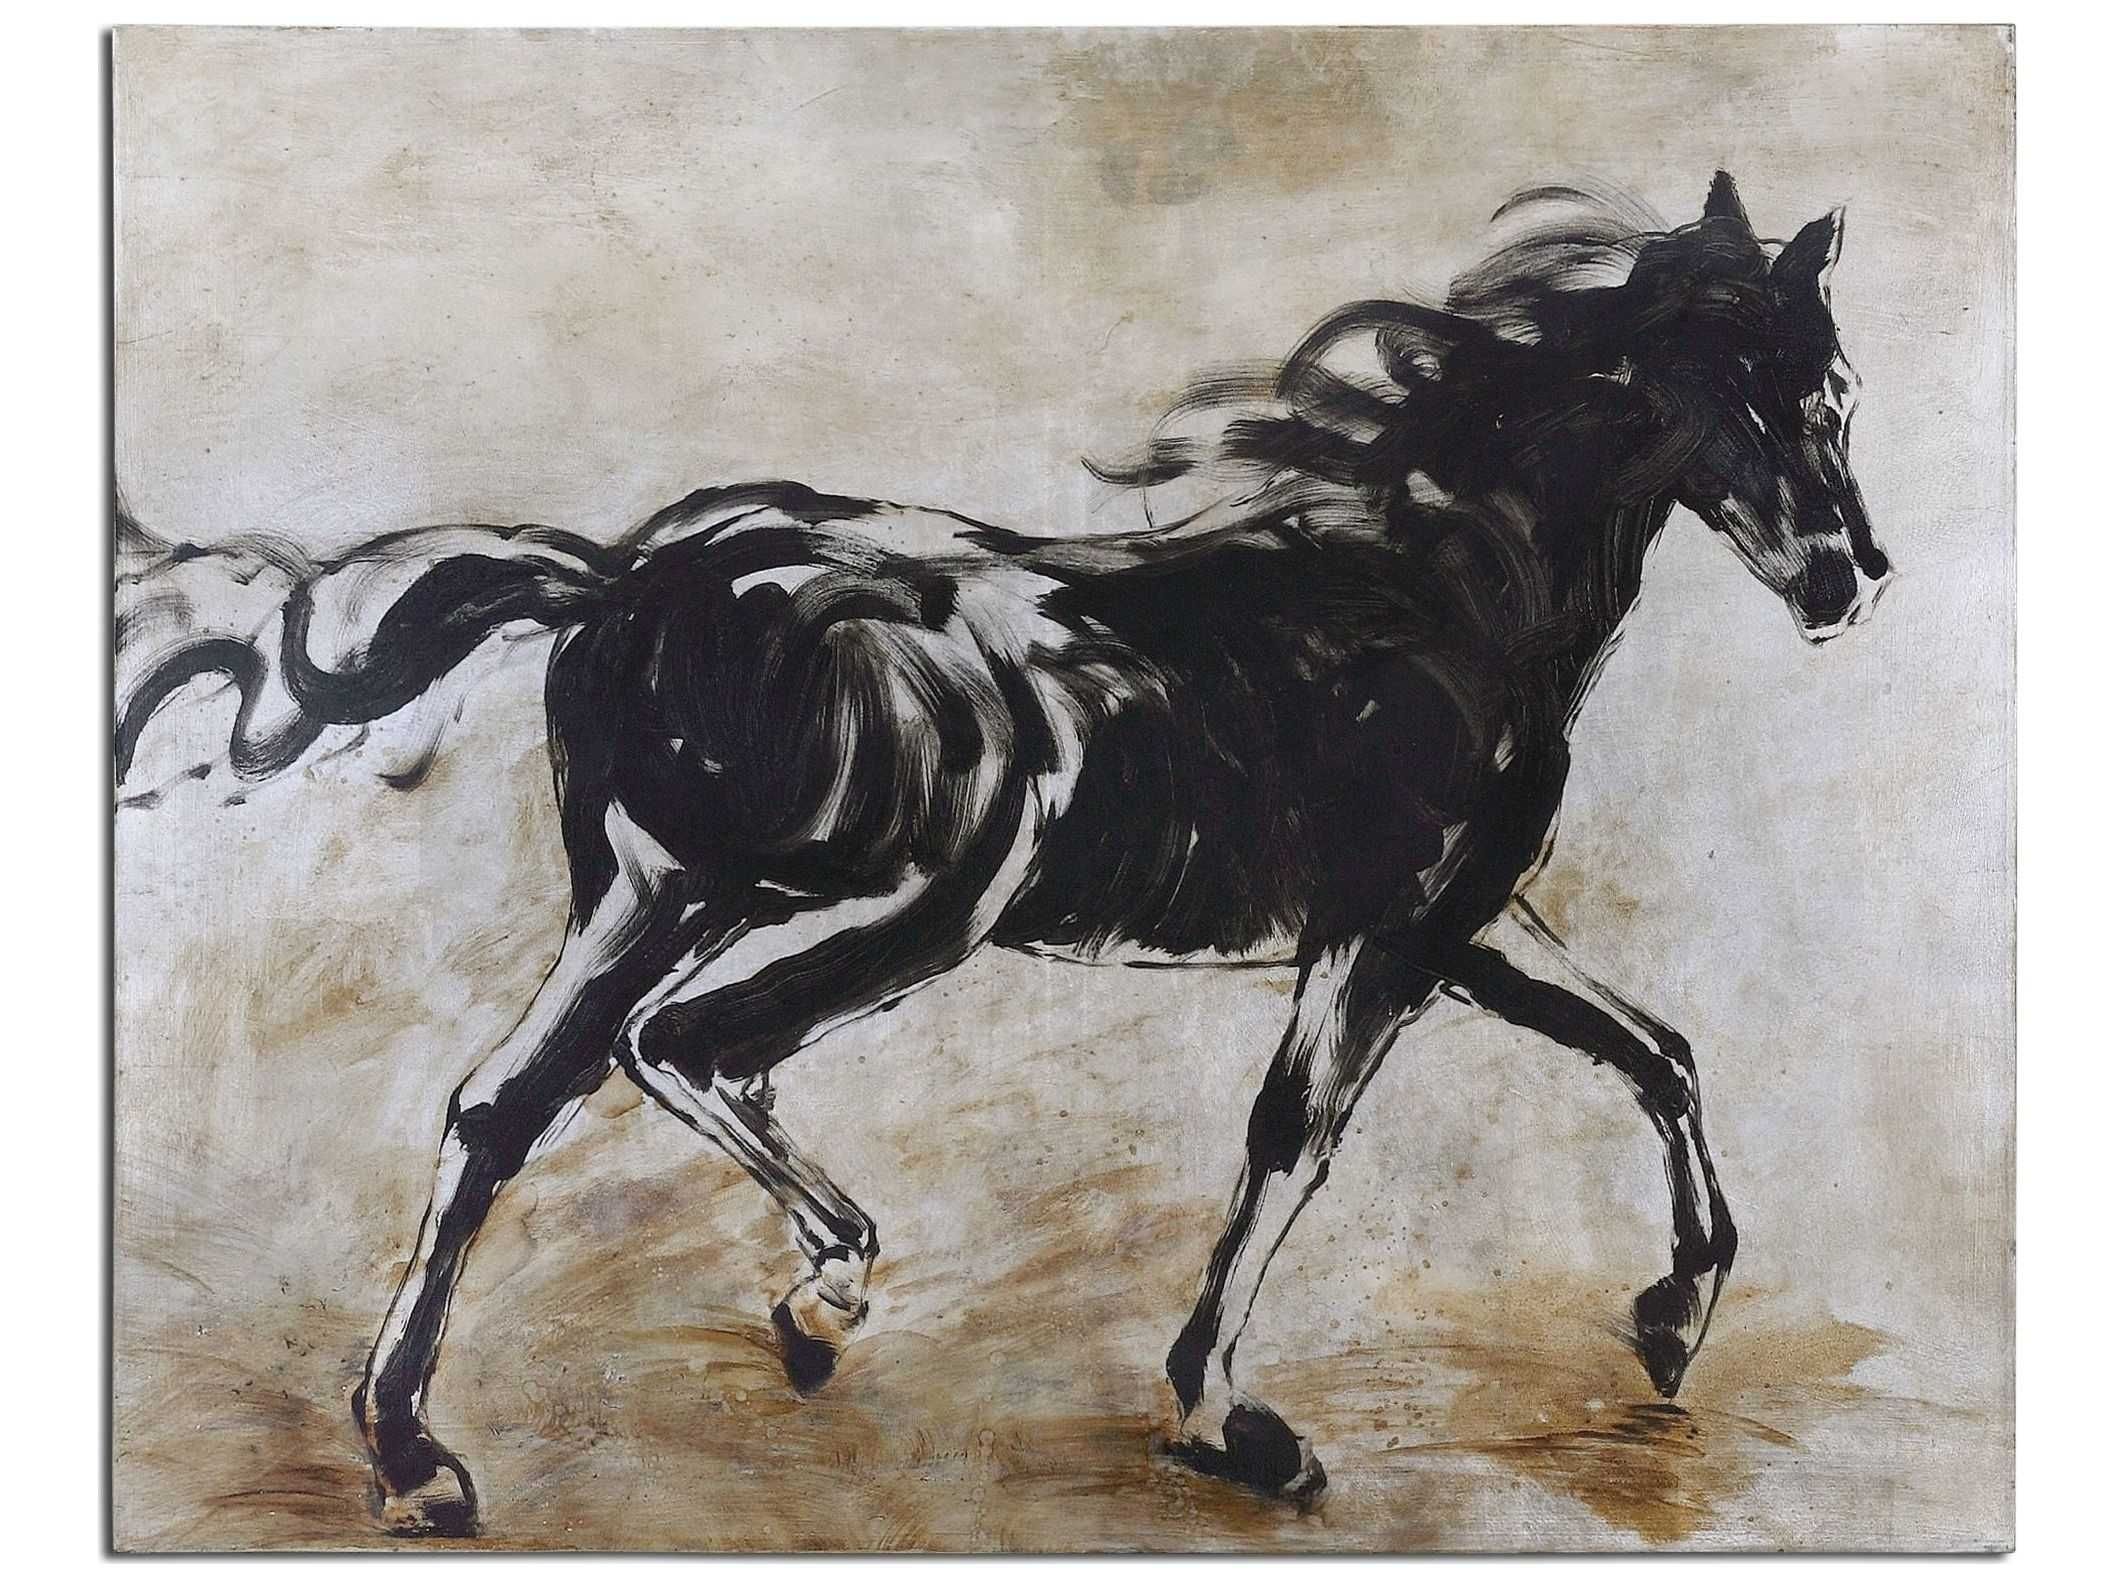 Uttermost Blacks Beauty Horse Wall Art | Ut34262 With Regard To 2018 Horse Wall Art (View 14 of 15)